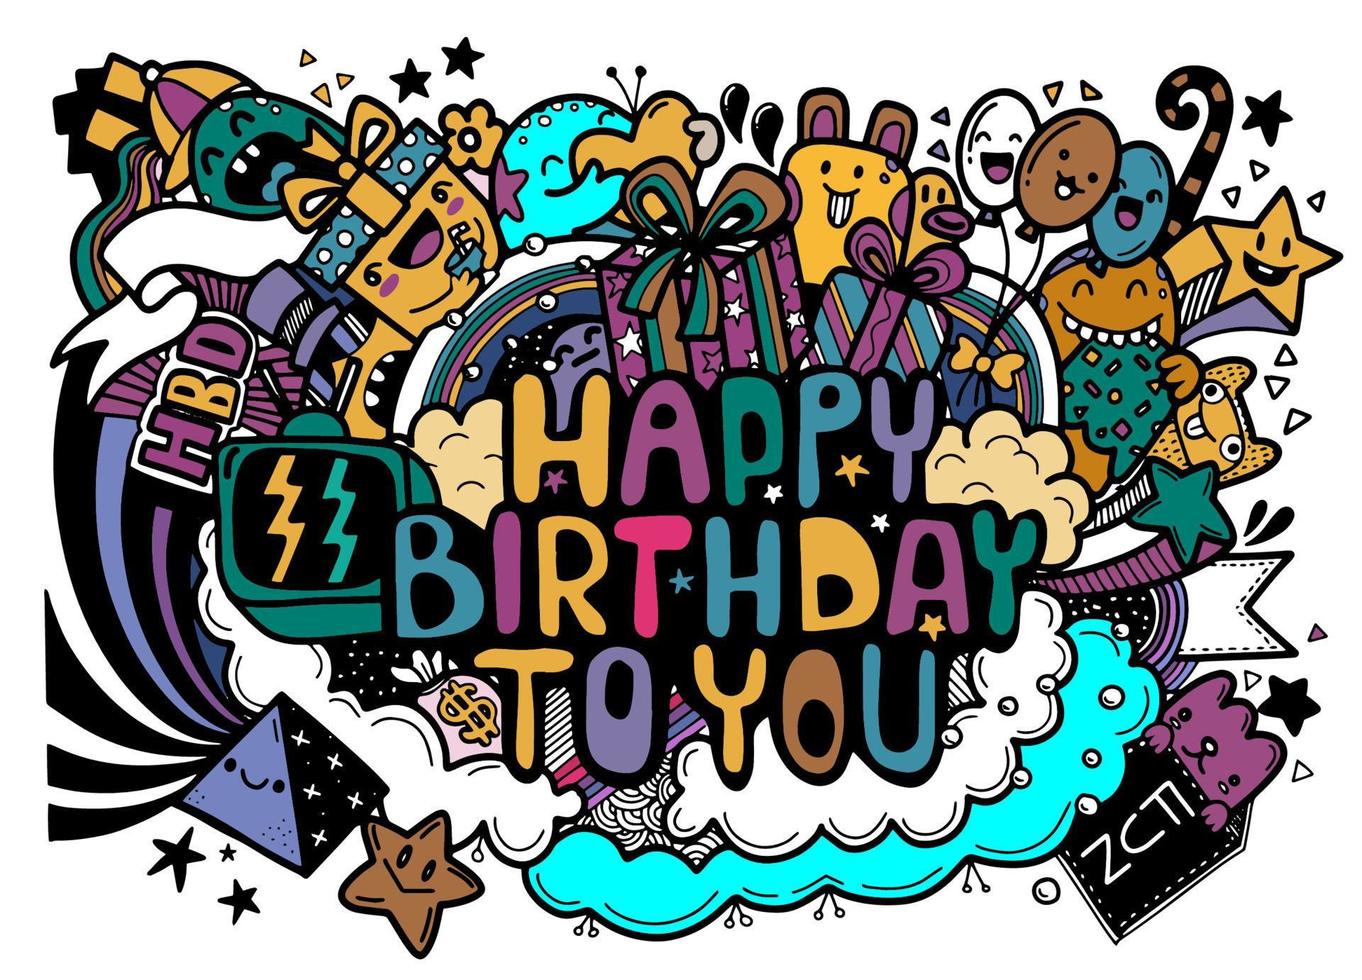 Doodle Birthday party background , cute style vector